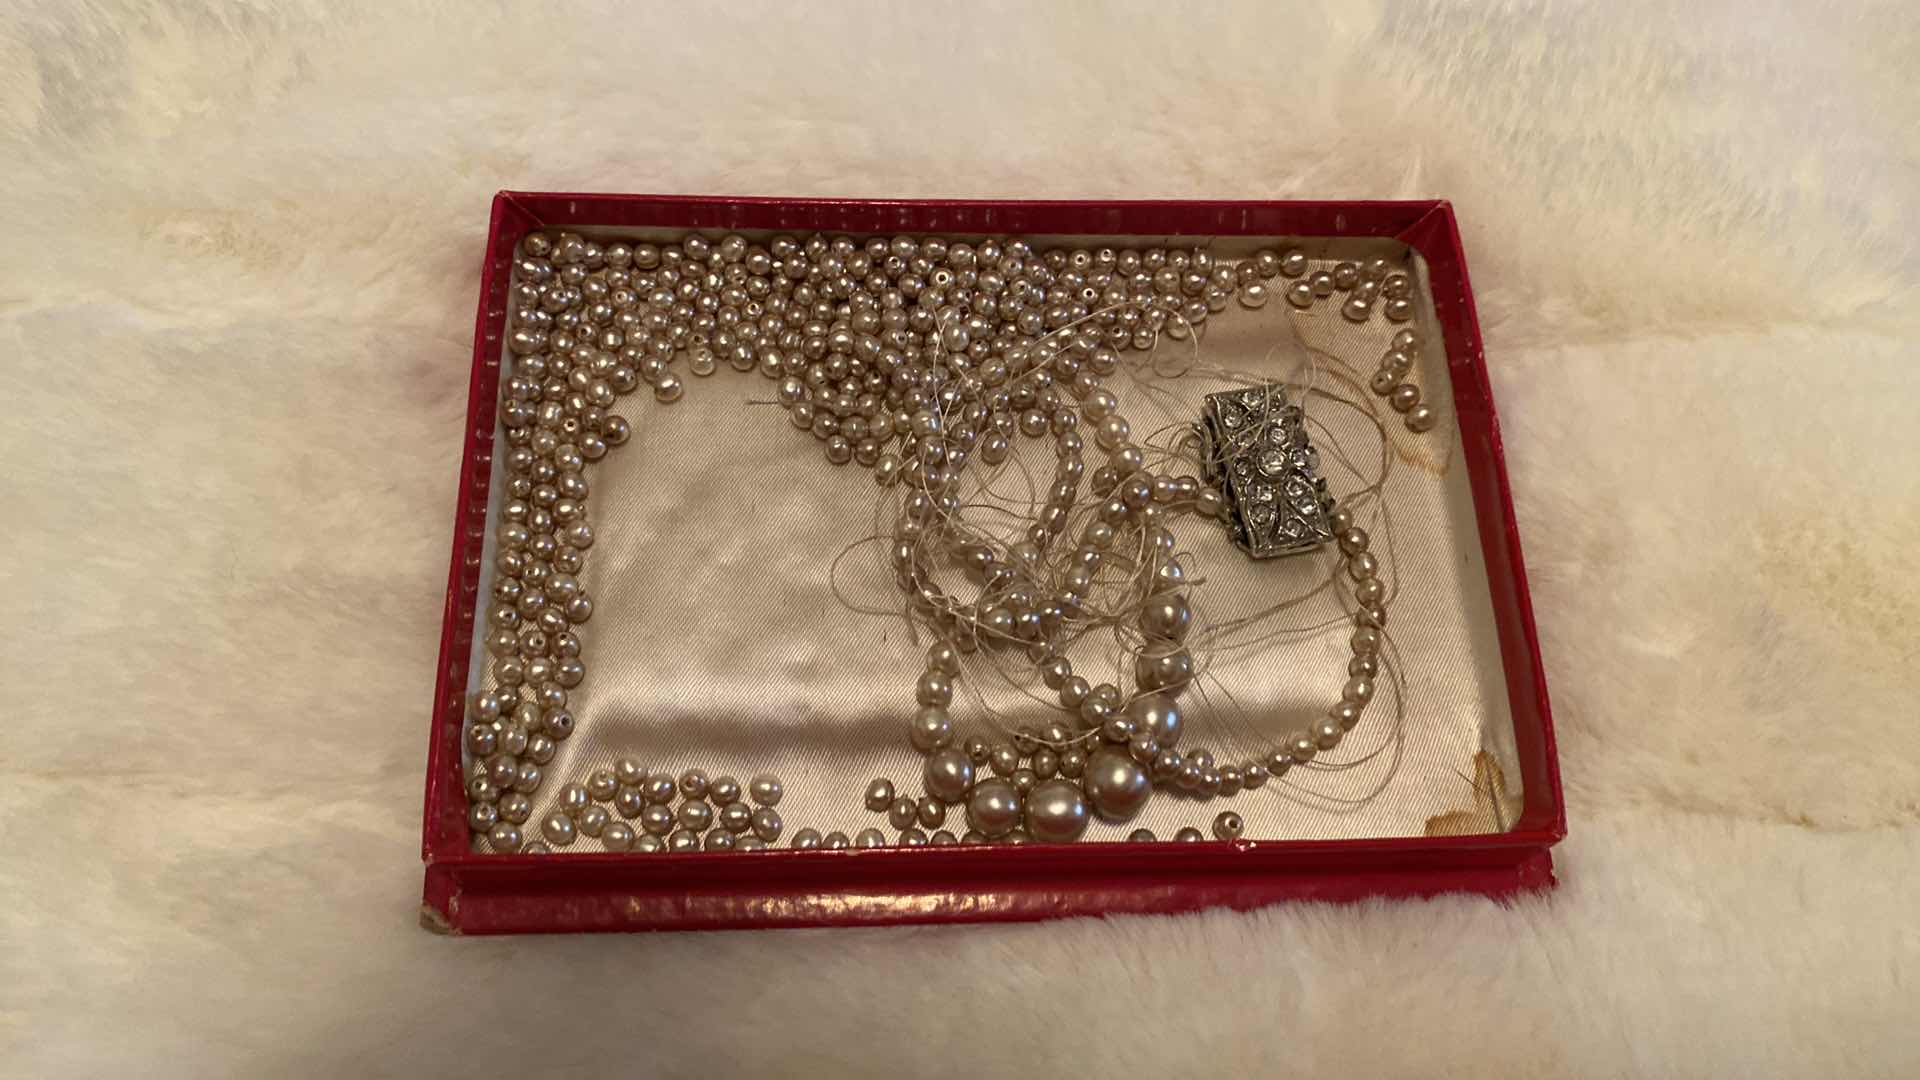 Photo 7 of VINTAGE 1940’s SEQUIN AND BEADED CLUTCH 9 1/4” X 5 1/2” AND PEARLS NECKLACE (NECKLACE NEEDS RESTRINGING)